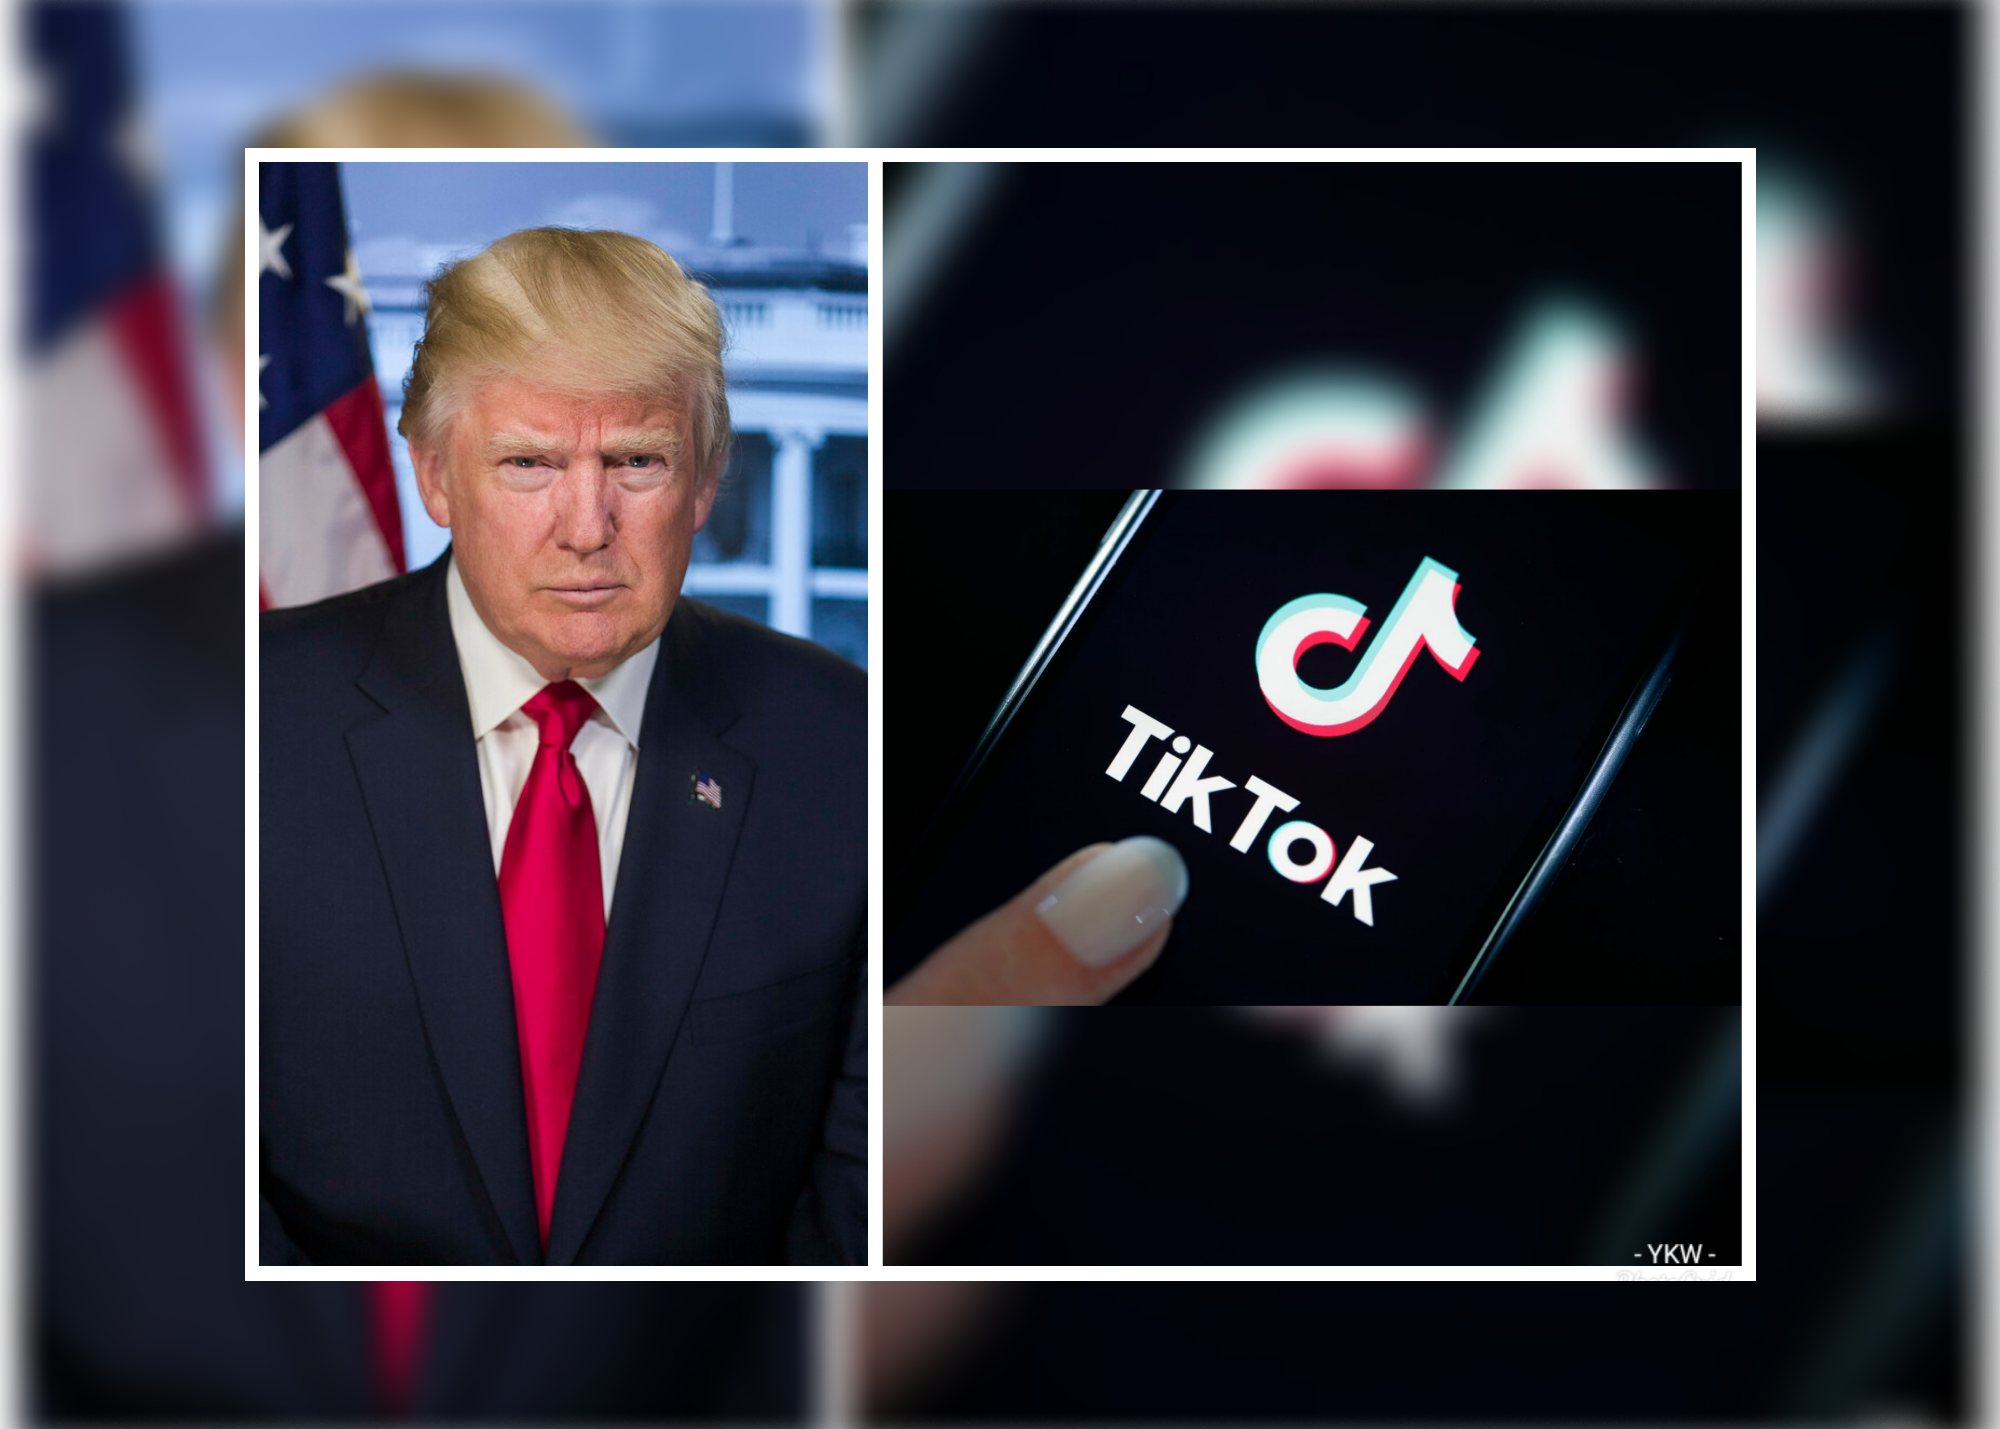 Trump Says He Will Ban TikTok And Other Chinese Apps From The U.S.